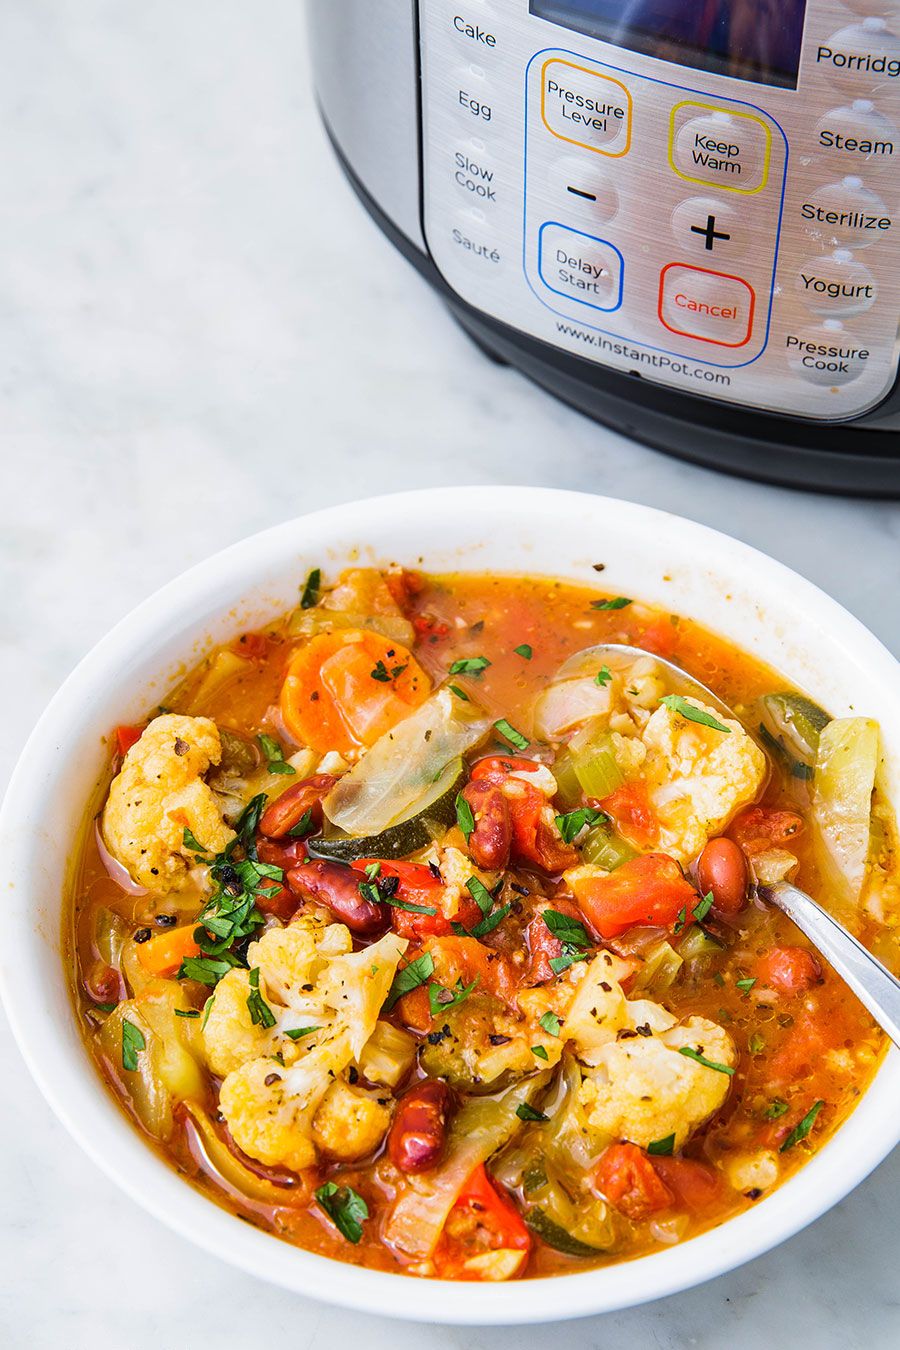 How to Use Your Instant Pot (10 Things You Should Know!) - Detoxinista